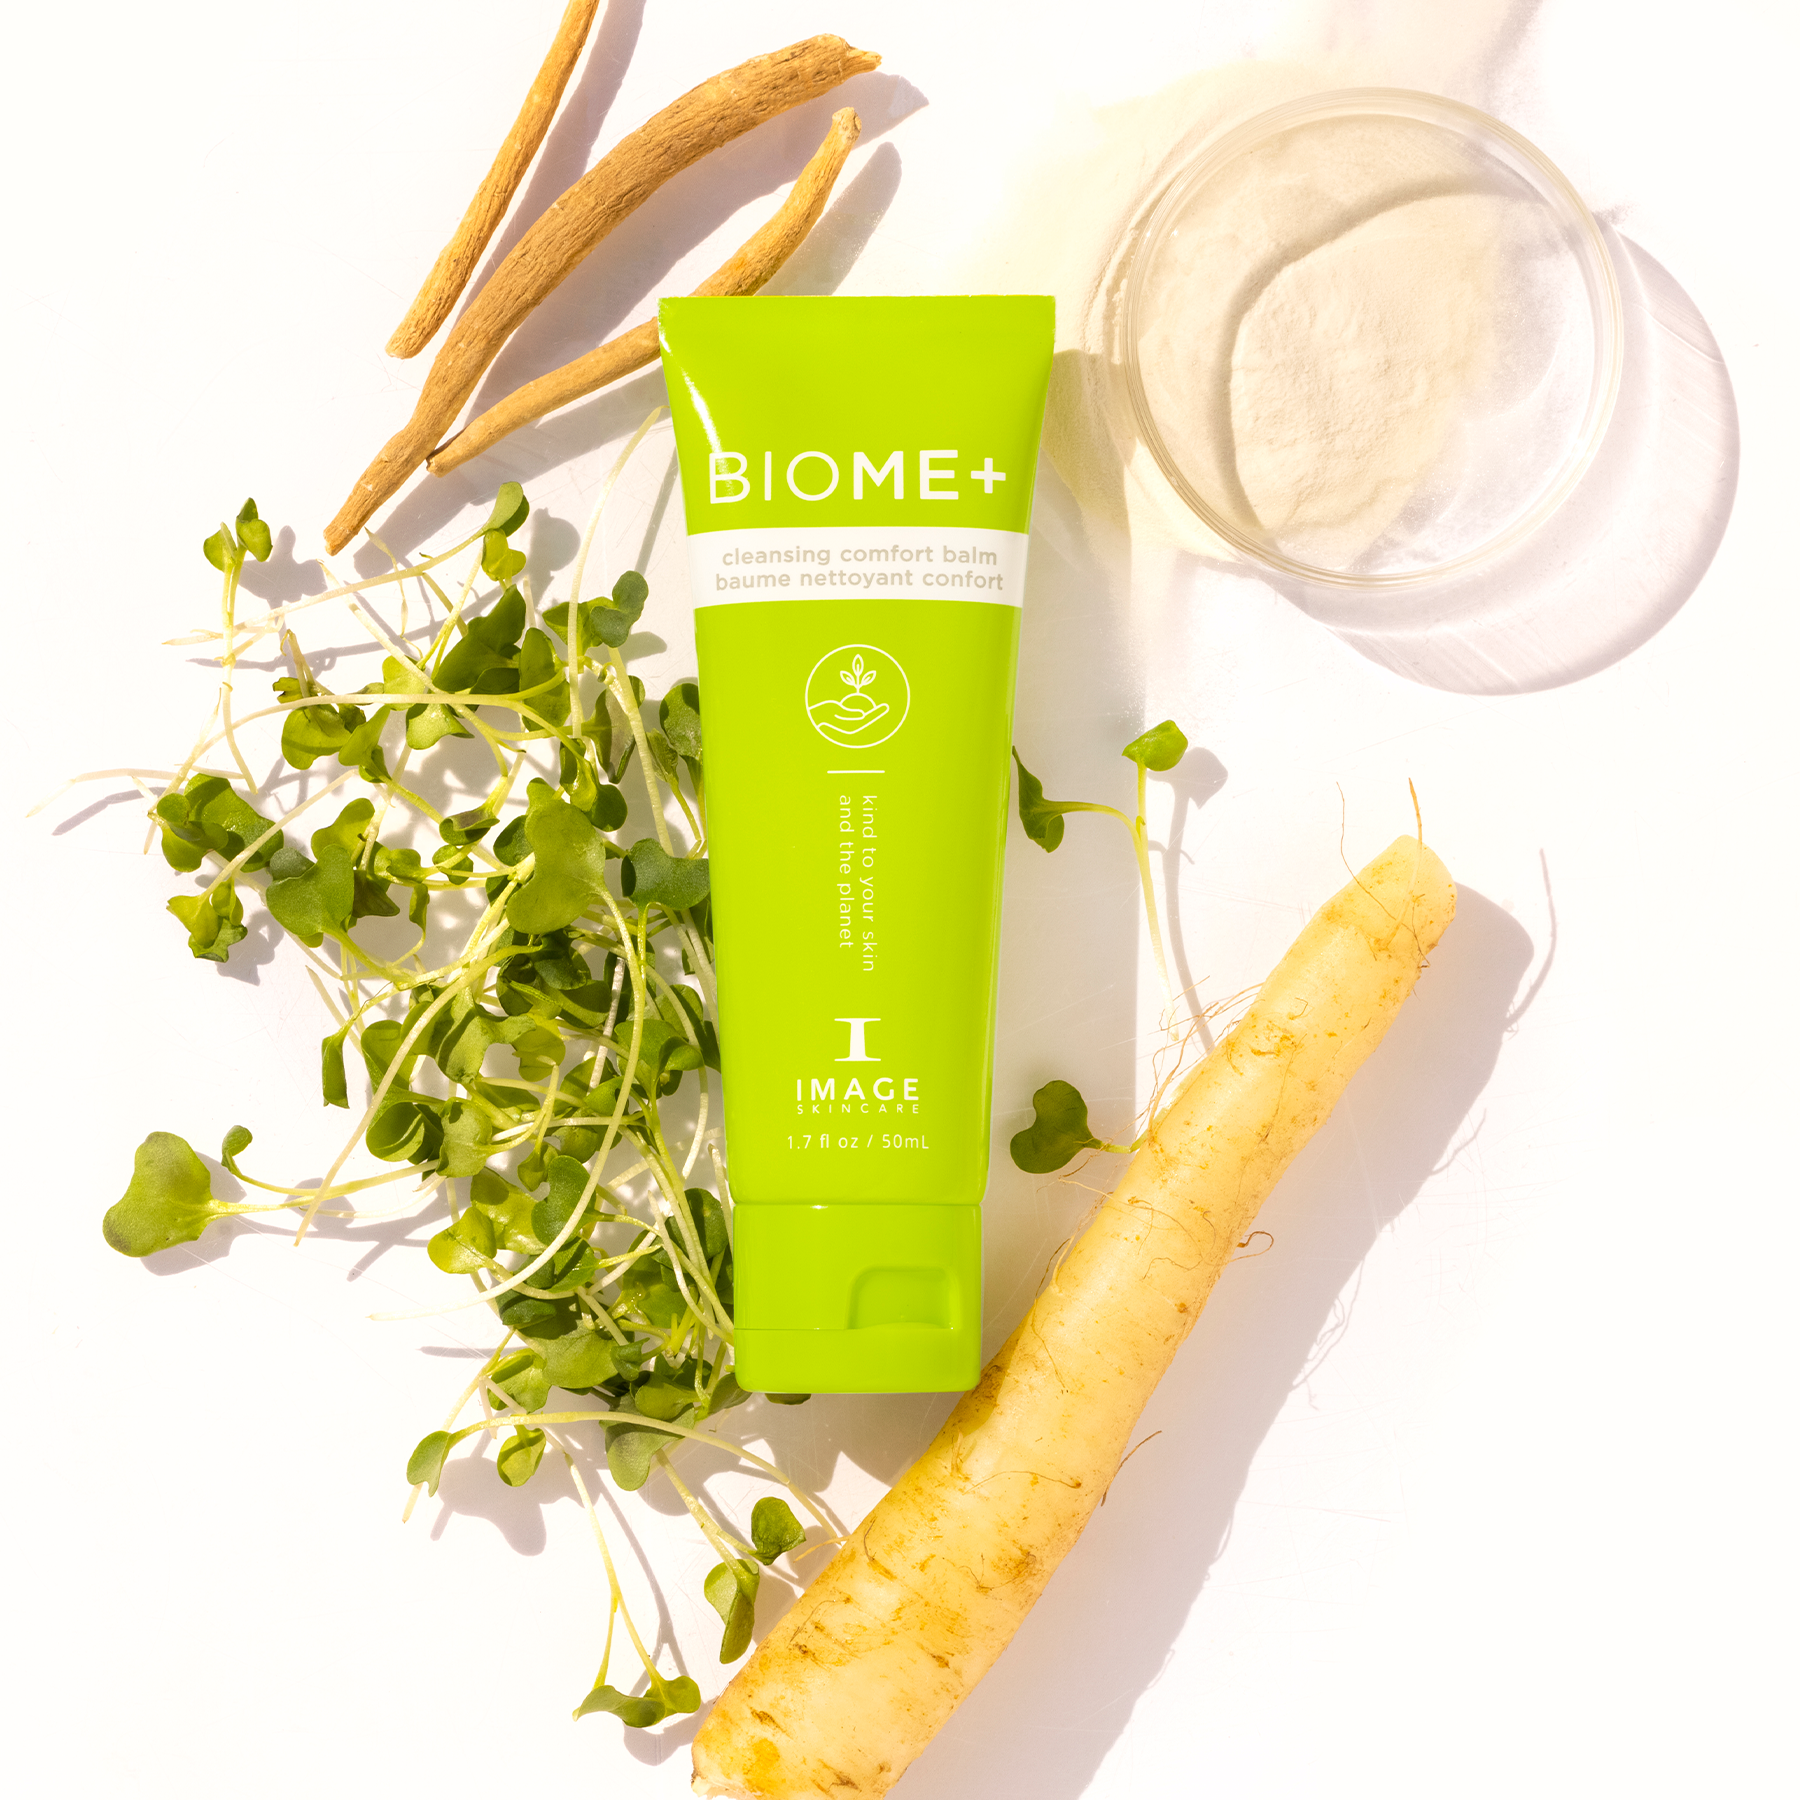 BIOME+™  cleansing comfort balm discovery-size